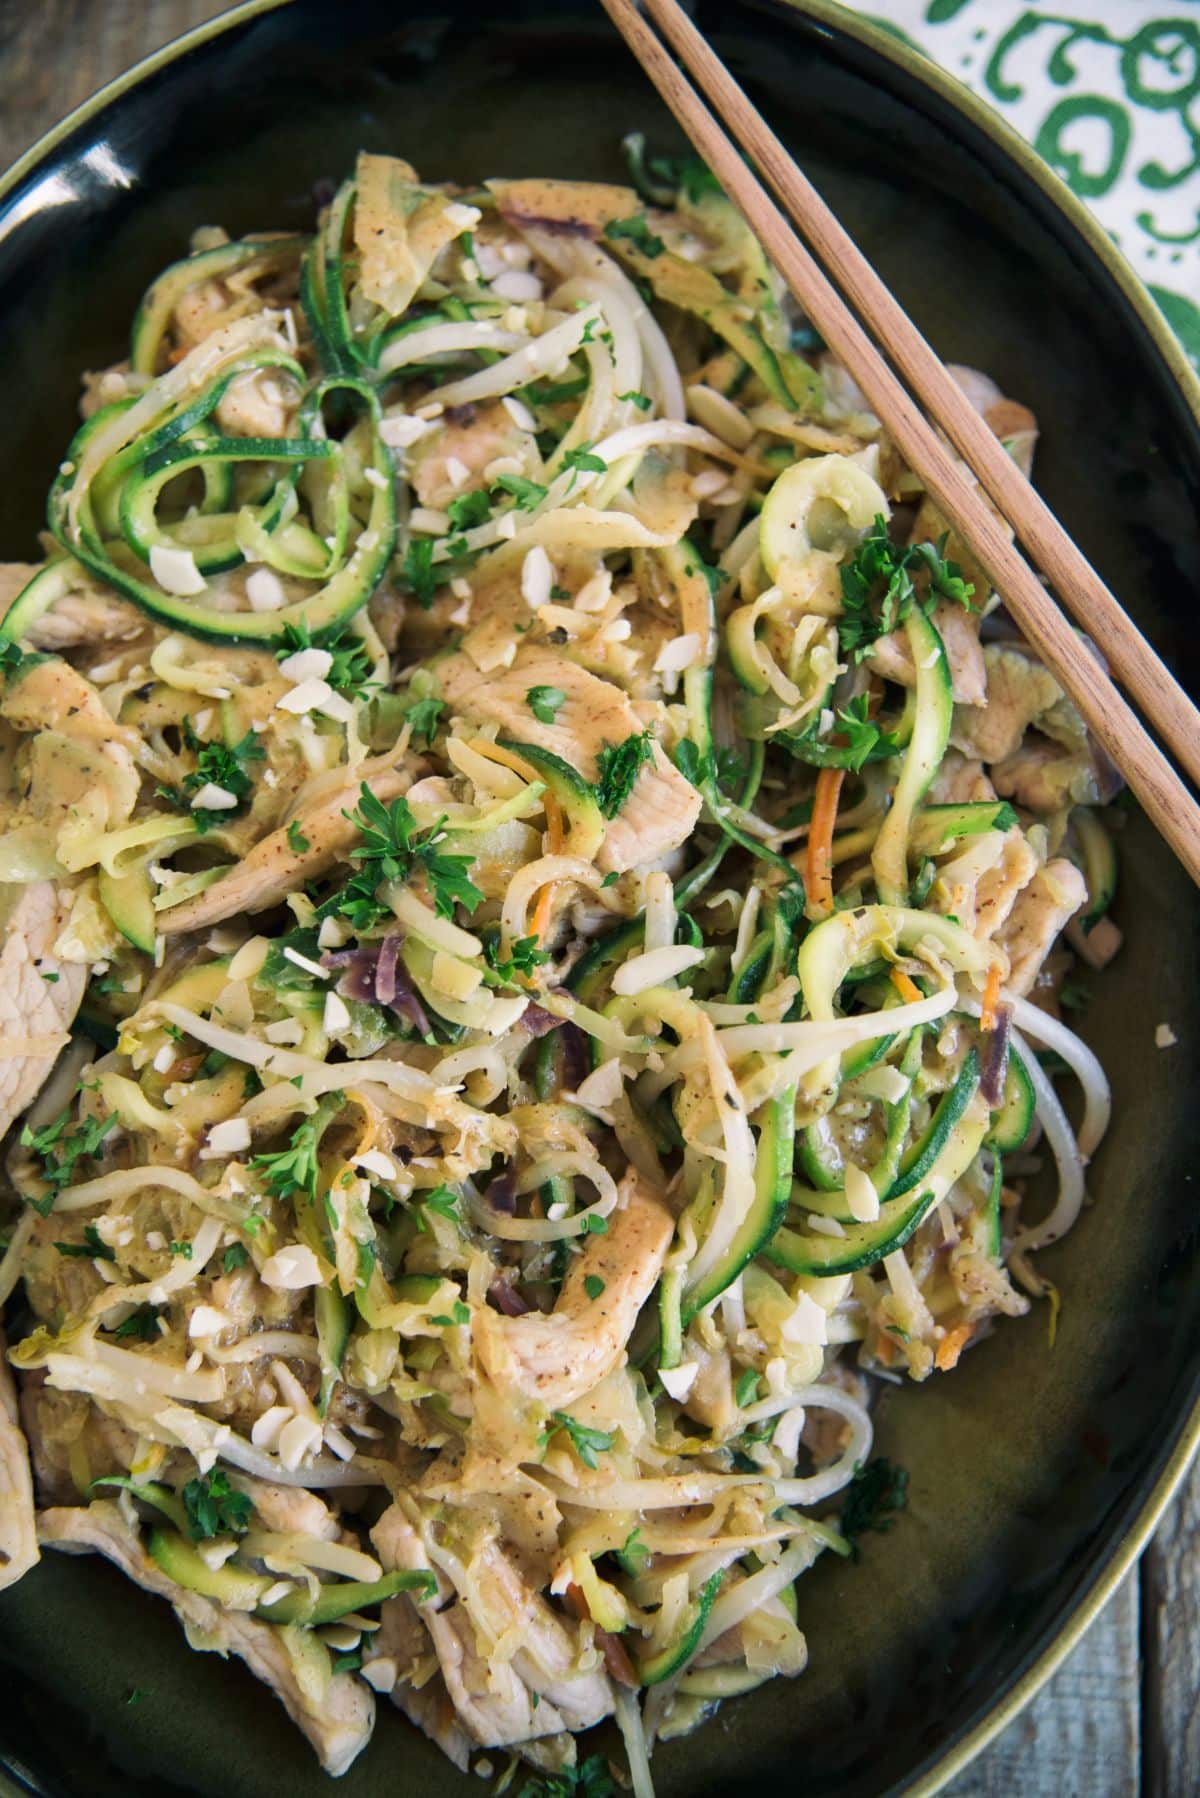 Almond Butter Chicken With Zucchini Noodles in a black pan with chopsticks.